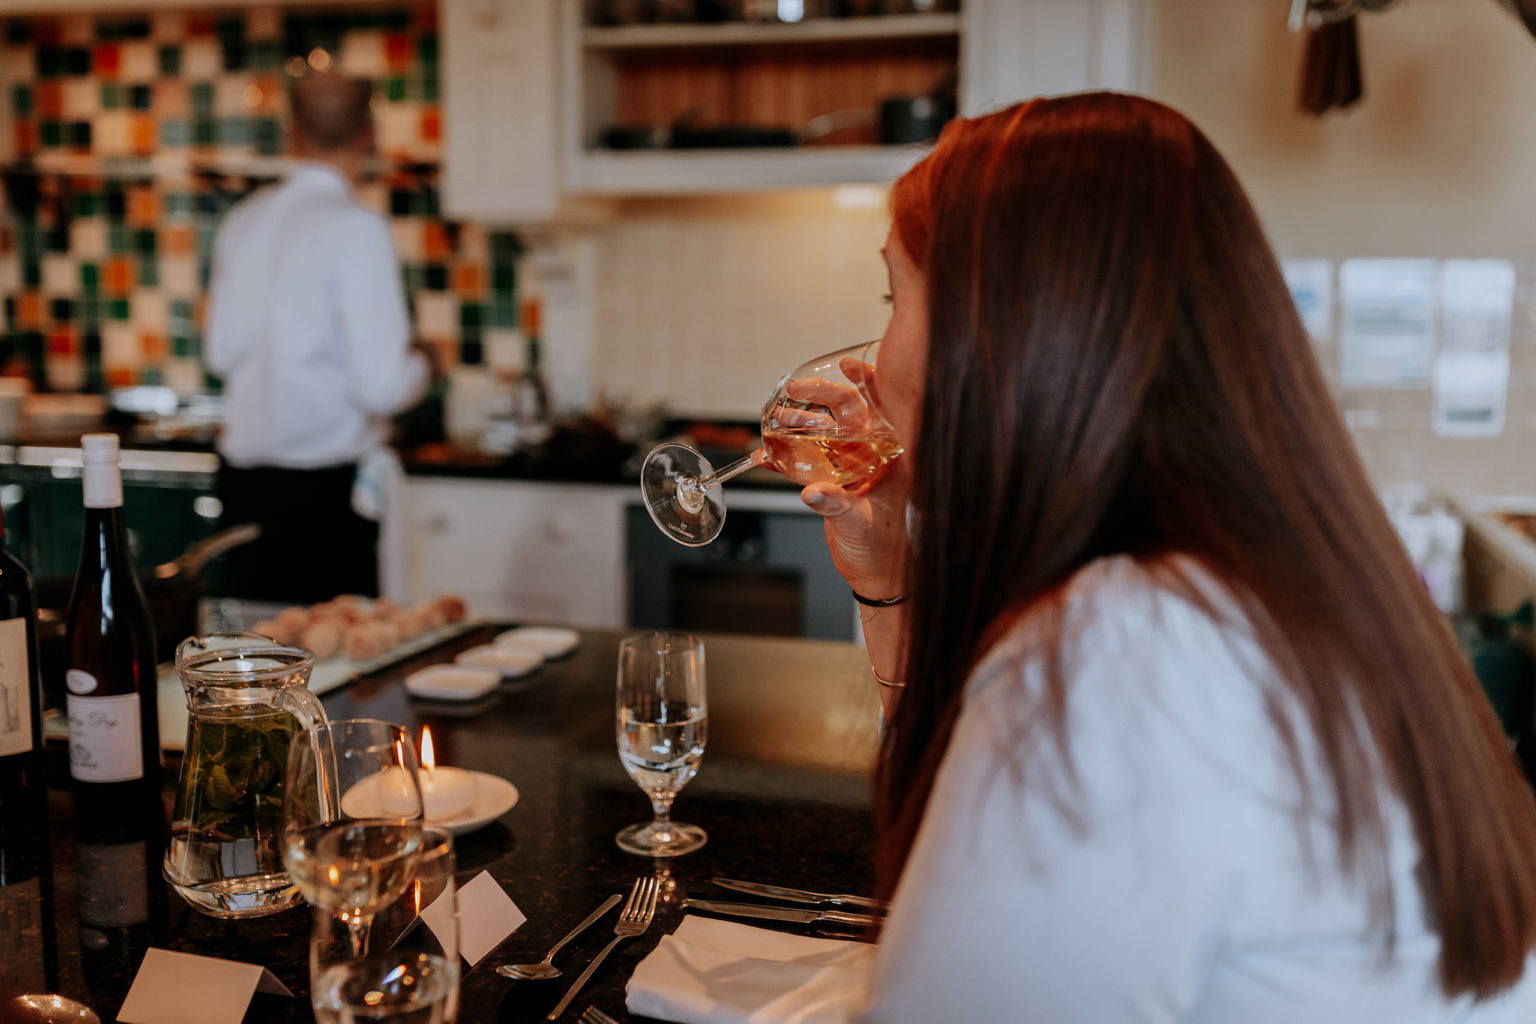 A woman drinking from a glass of wine during a fine dining Chef's Table experience at Swinton cookery School near Harrogate and the Yorkshire Dales